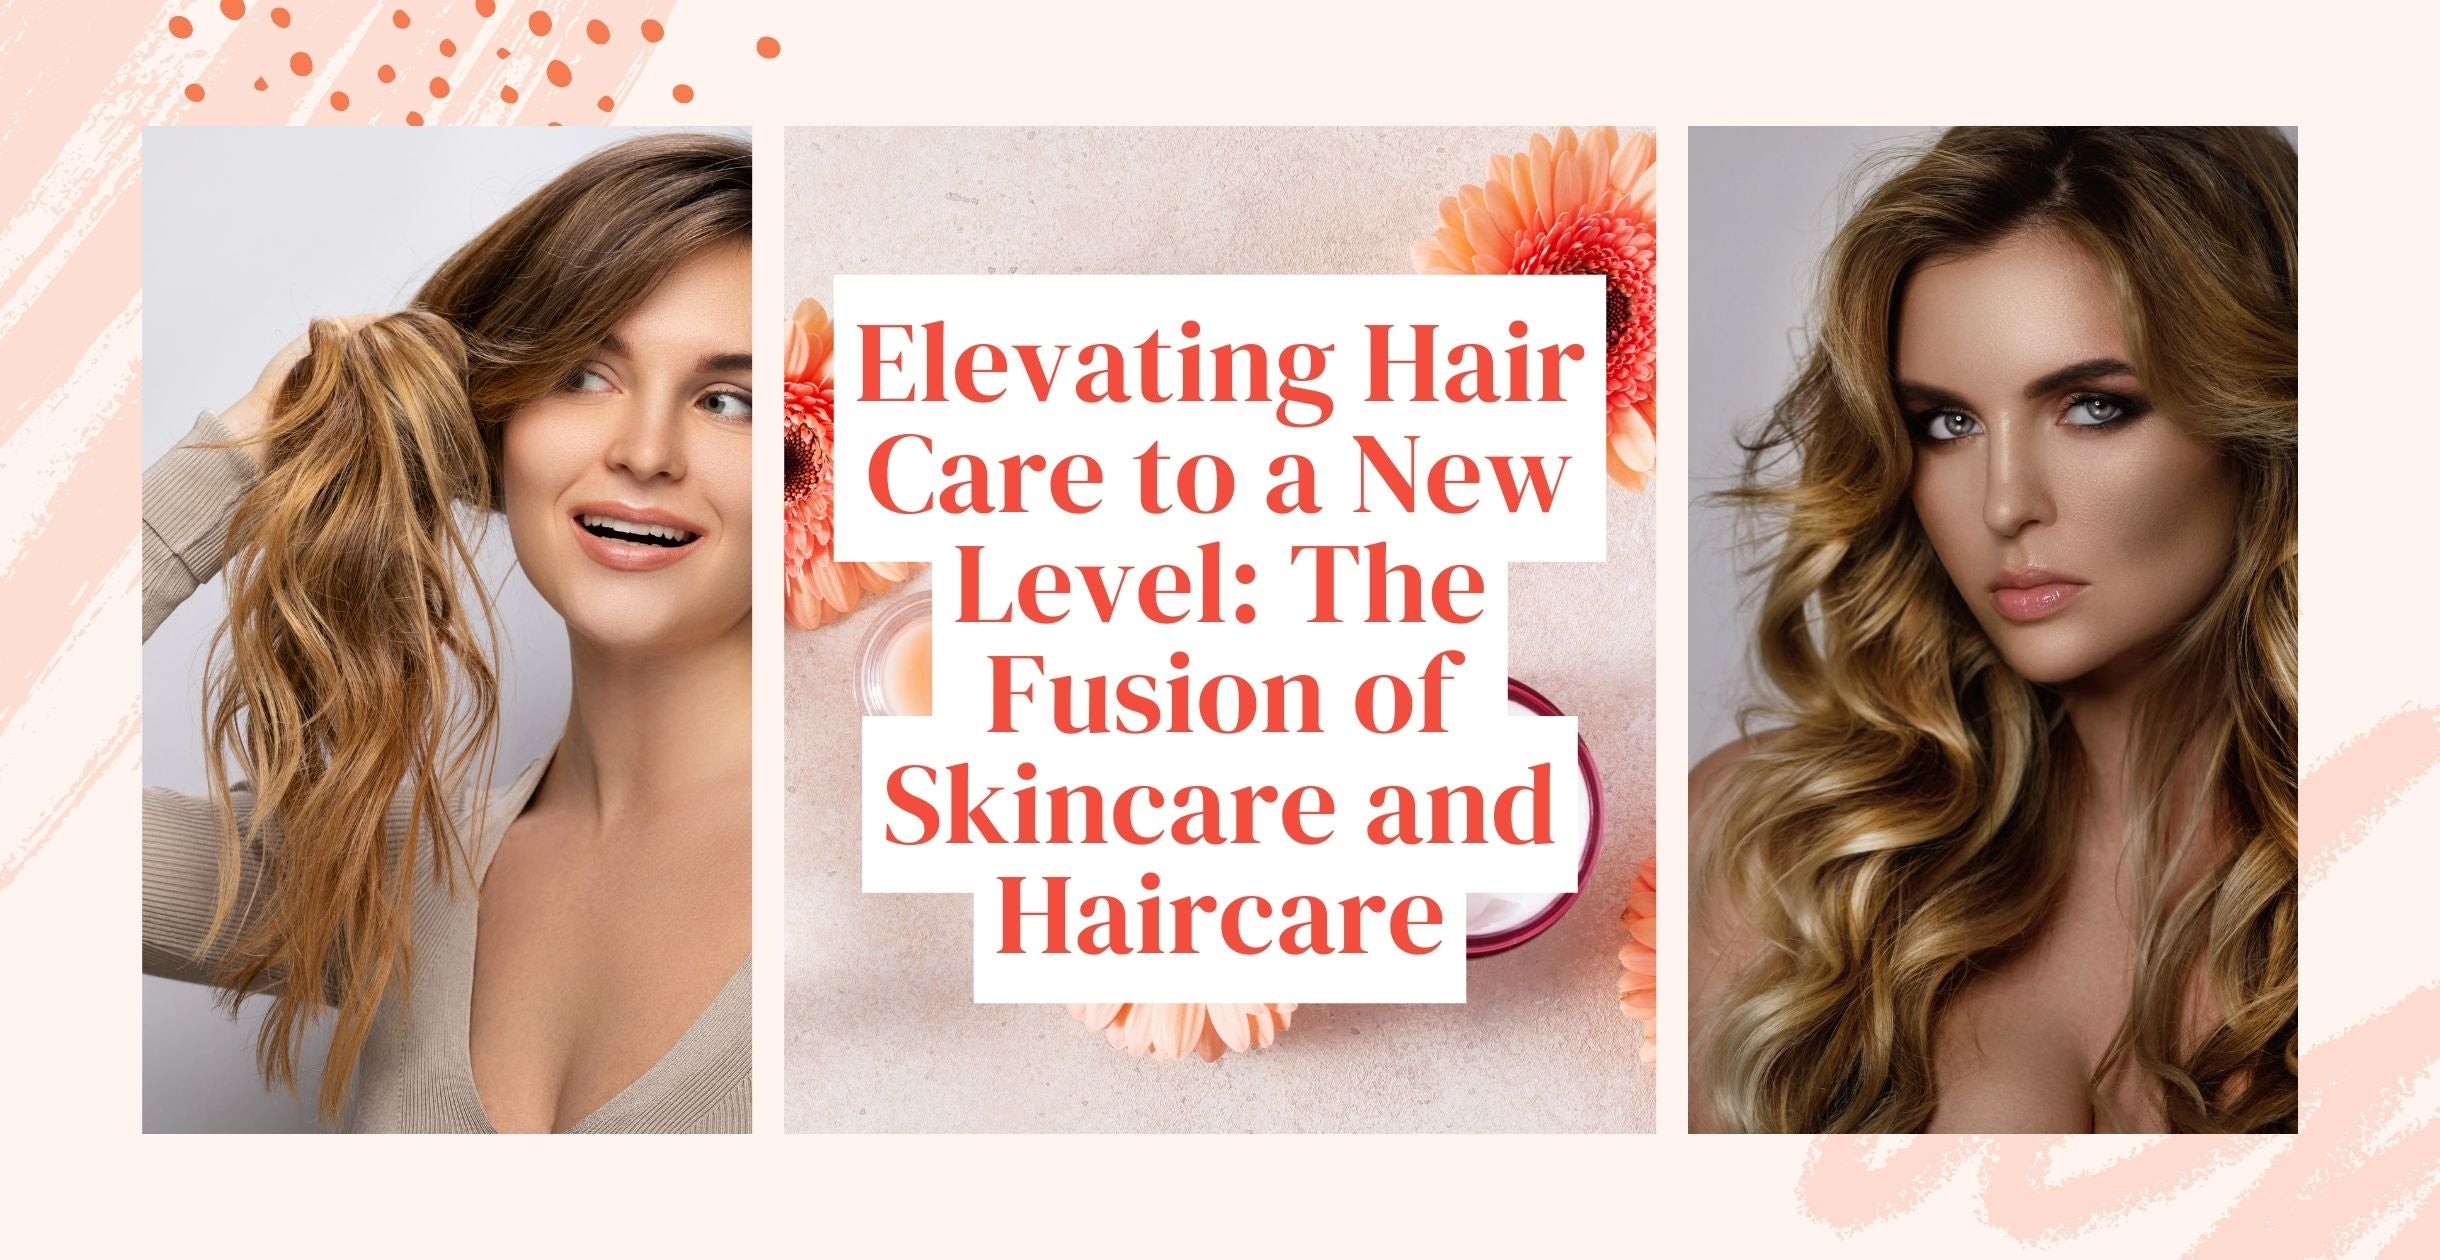 Elevating Hair Care to a New Level: The Fusion of Skincare and Haircare